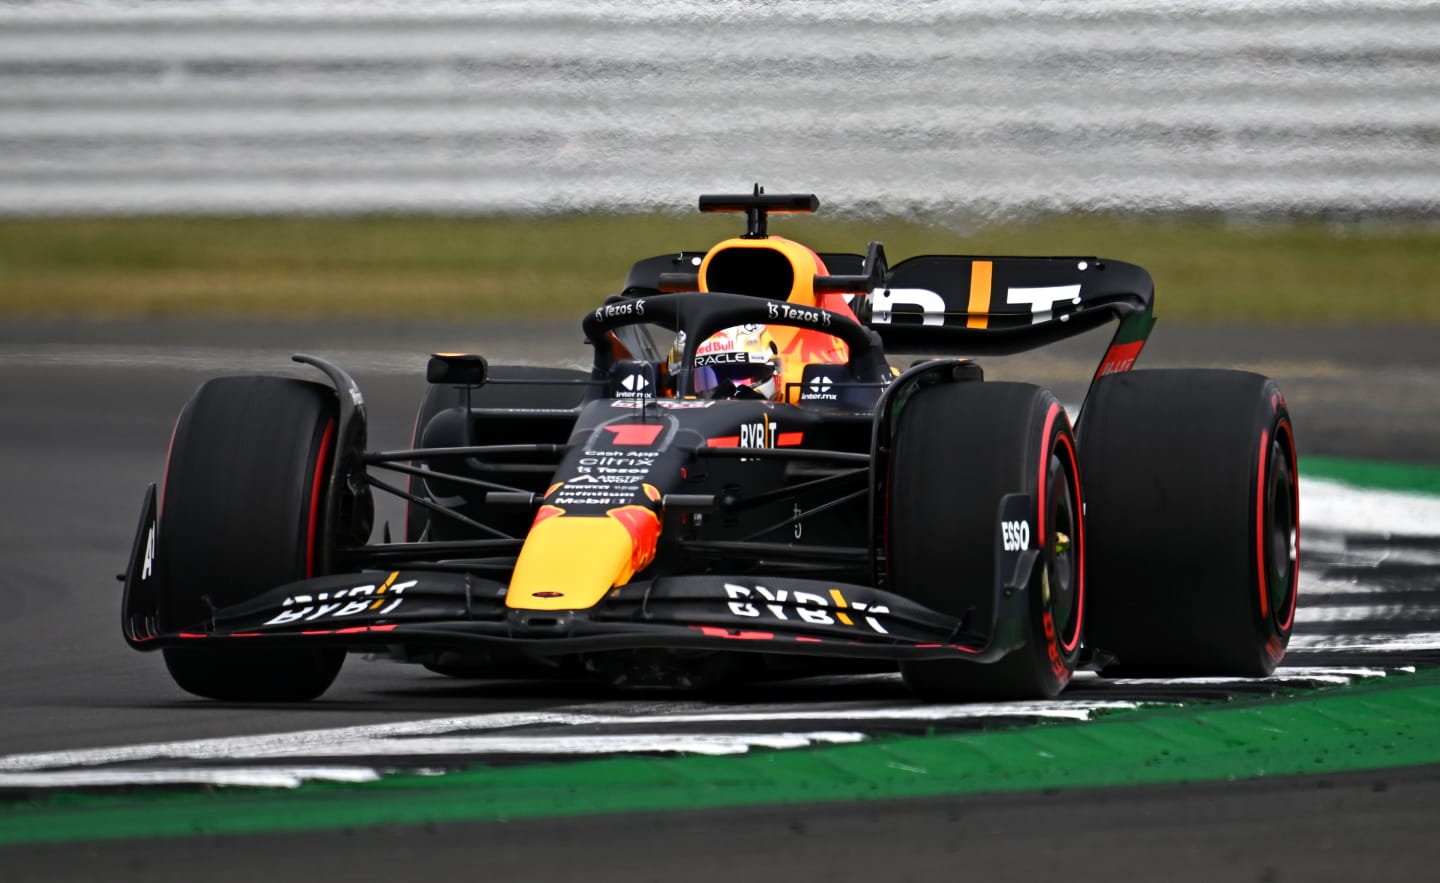 NORTHAMPTON, ENGLAND - JULY 01: Max Verstappen of the Netherlands driving the (1) Oracle Red Bull Racing RB18 on track during practice ahead of the F1 Grand Prix of Great Britain at Silverstone on July 01, 2022 in Northampton, England. (Photo by Clive Mason/Getty Images)